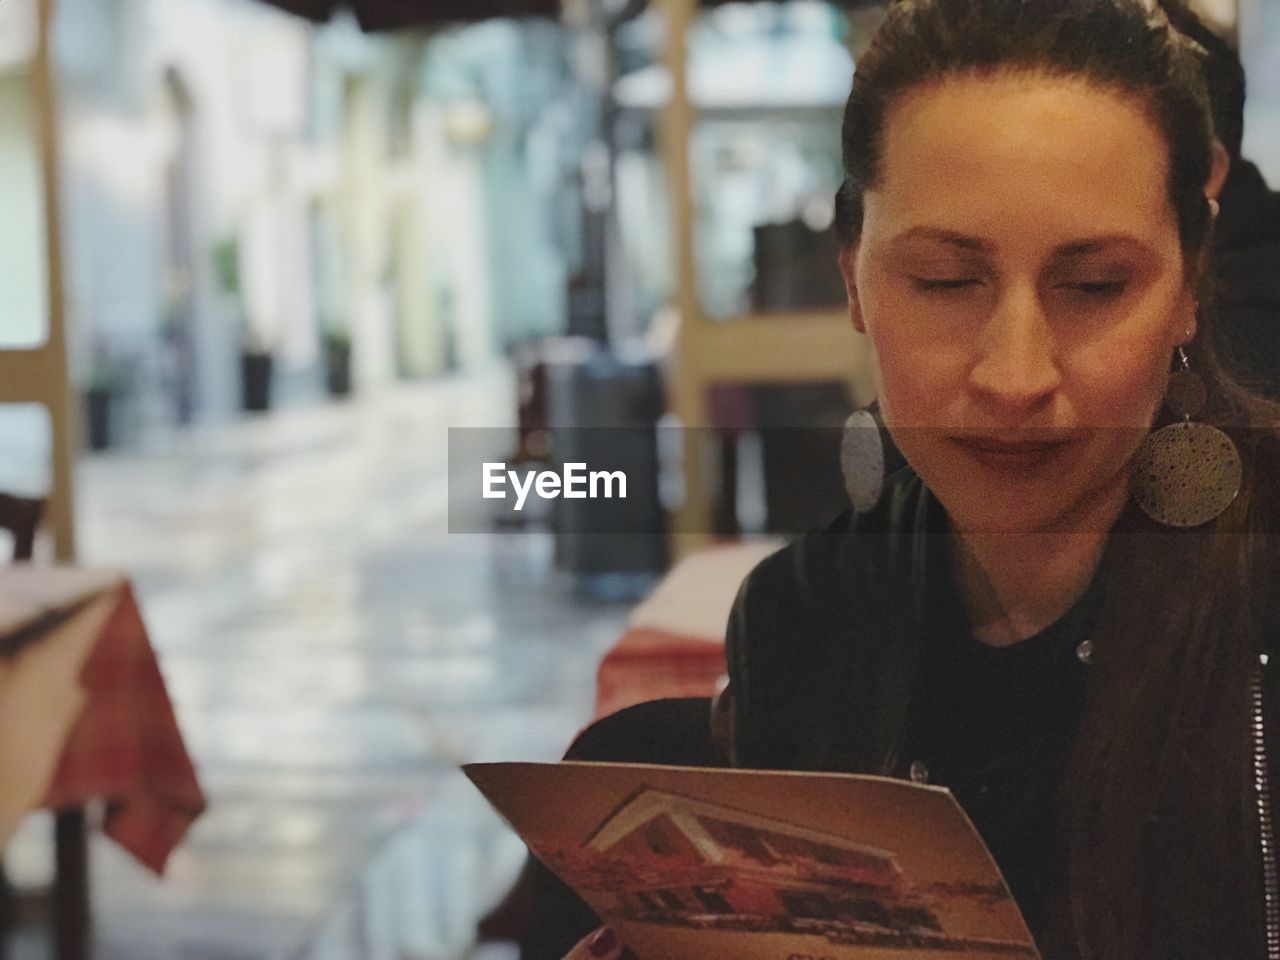 Woman looking at photograph in restaurant